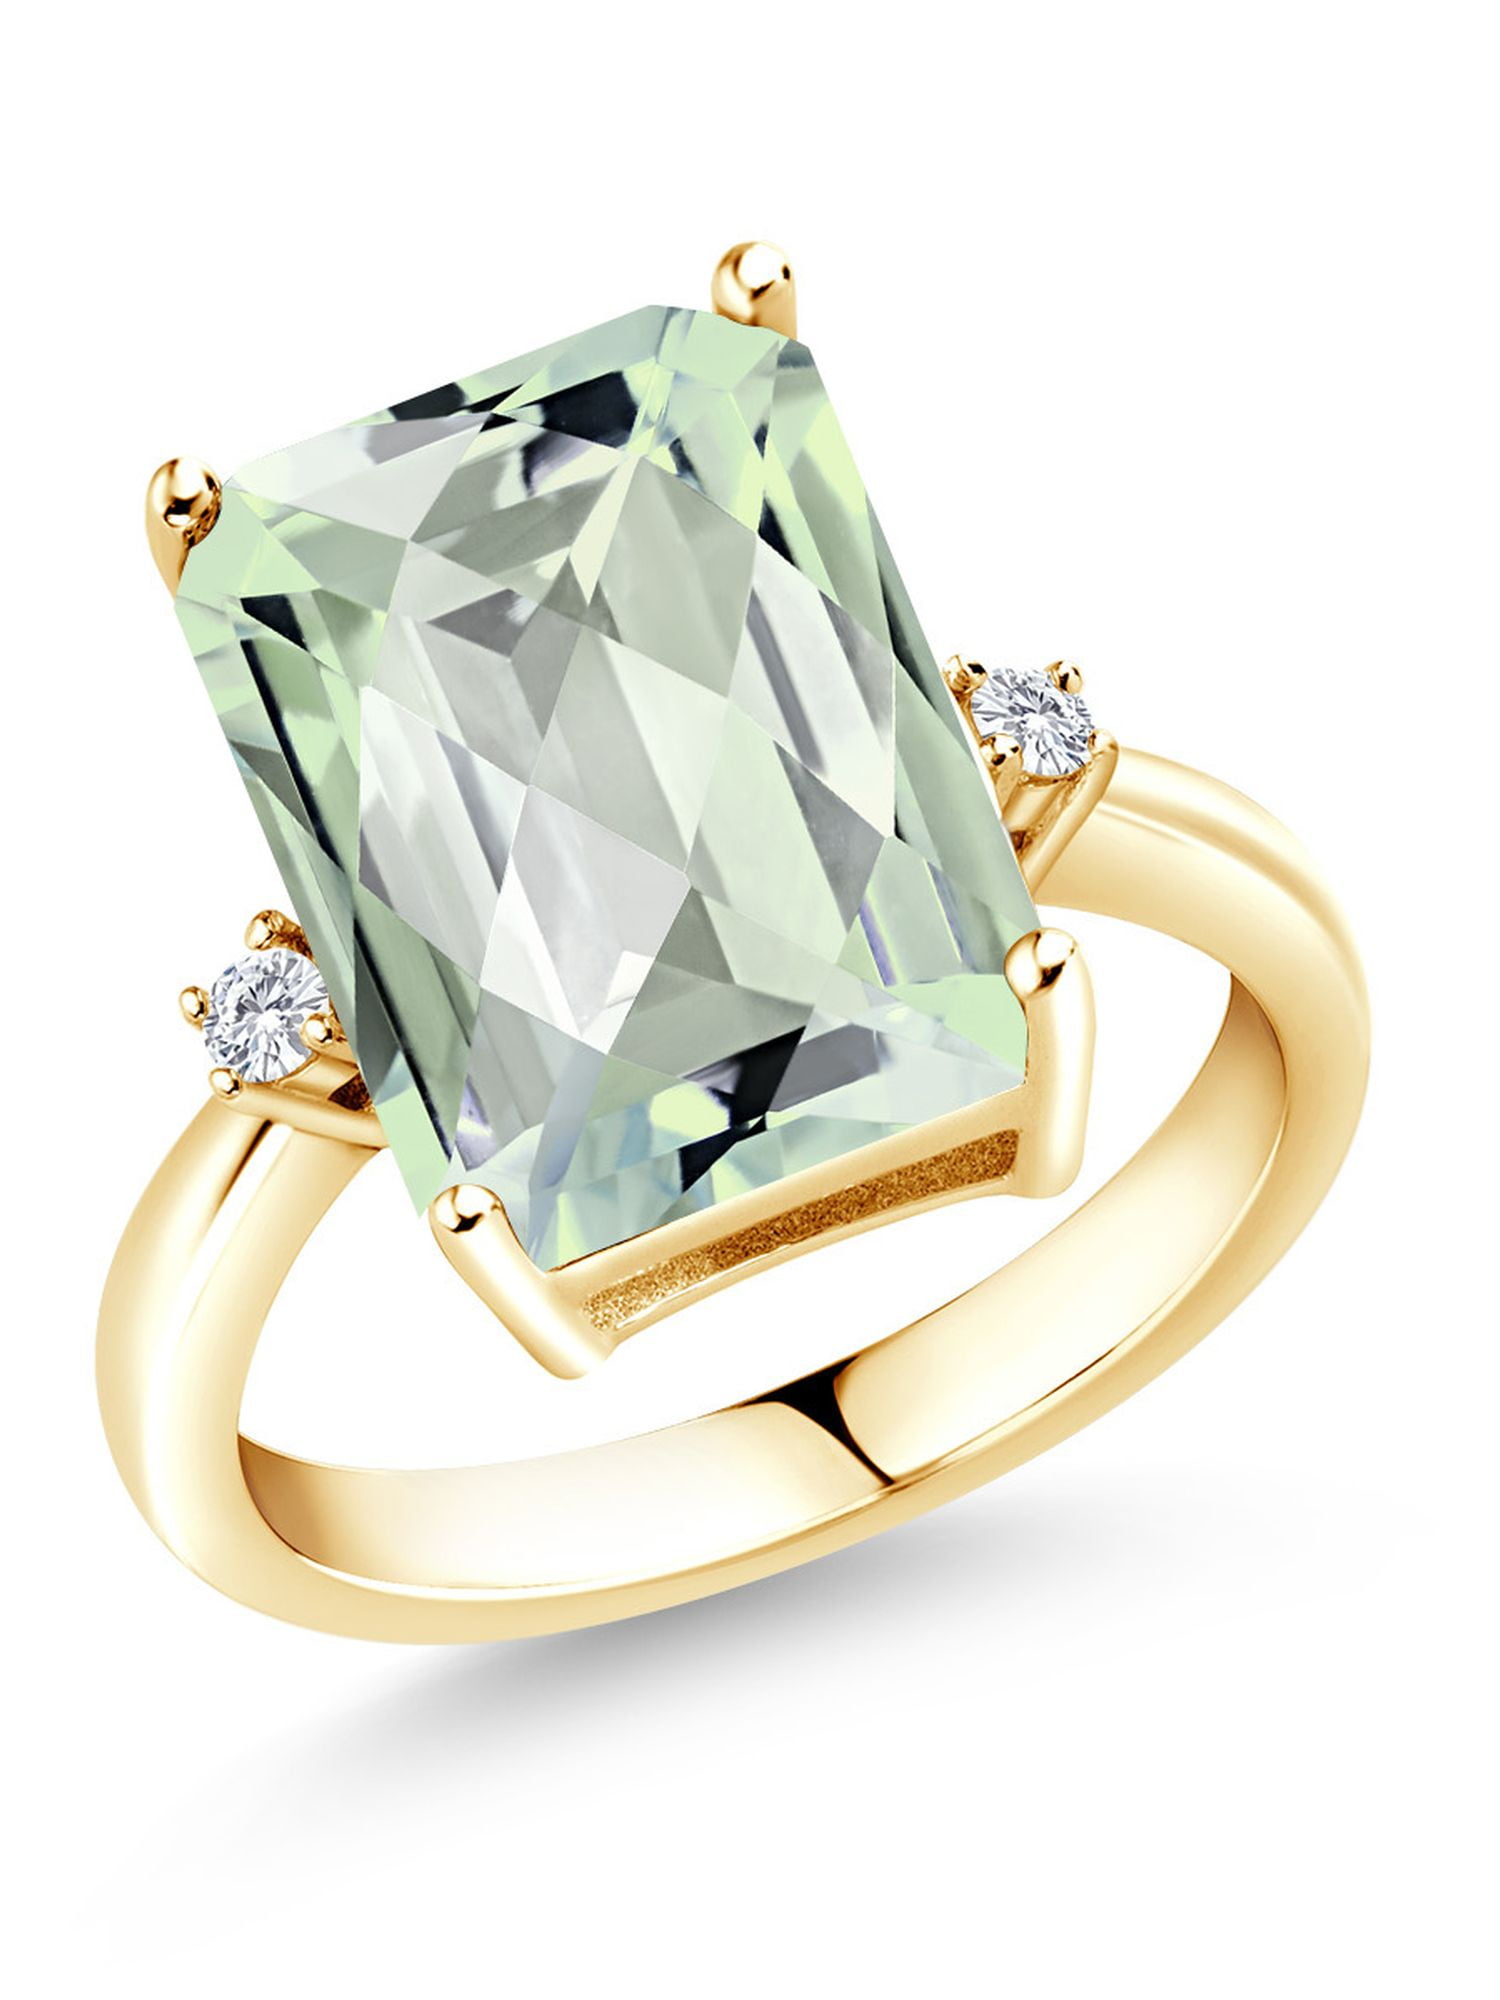 Buy Gemstone Rings Online in India | Latest Designs at Best Price by PC  Jeweller